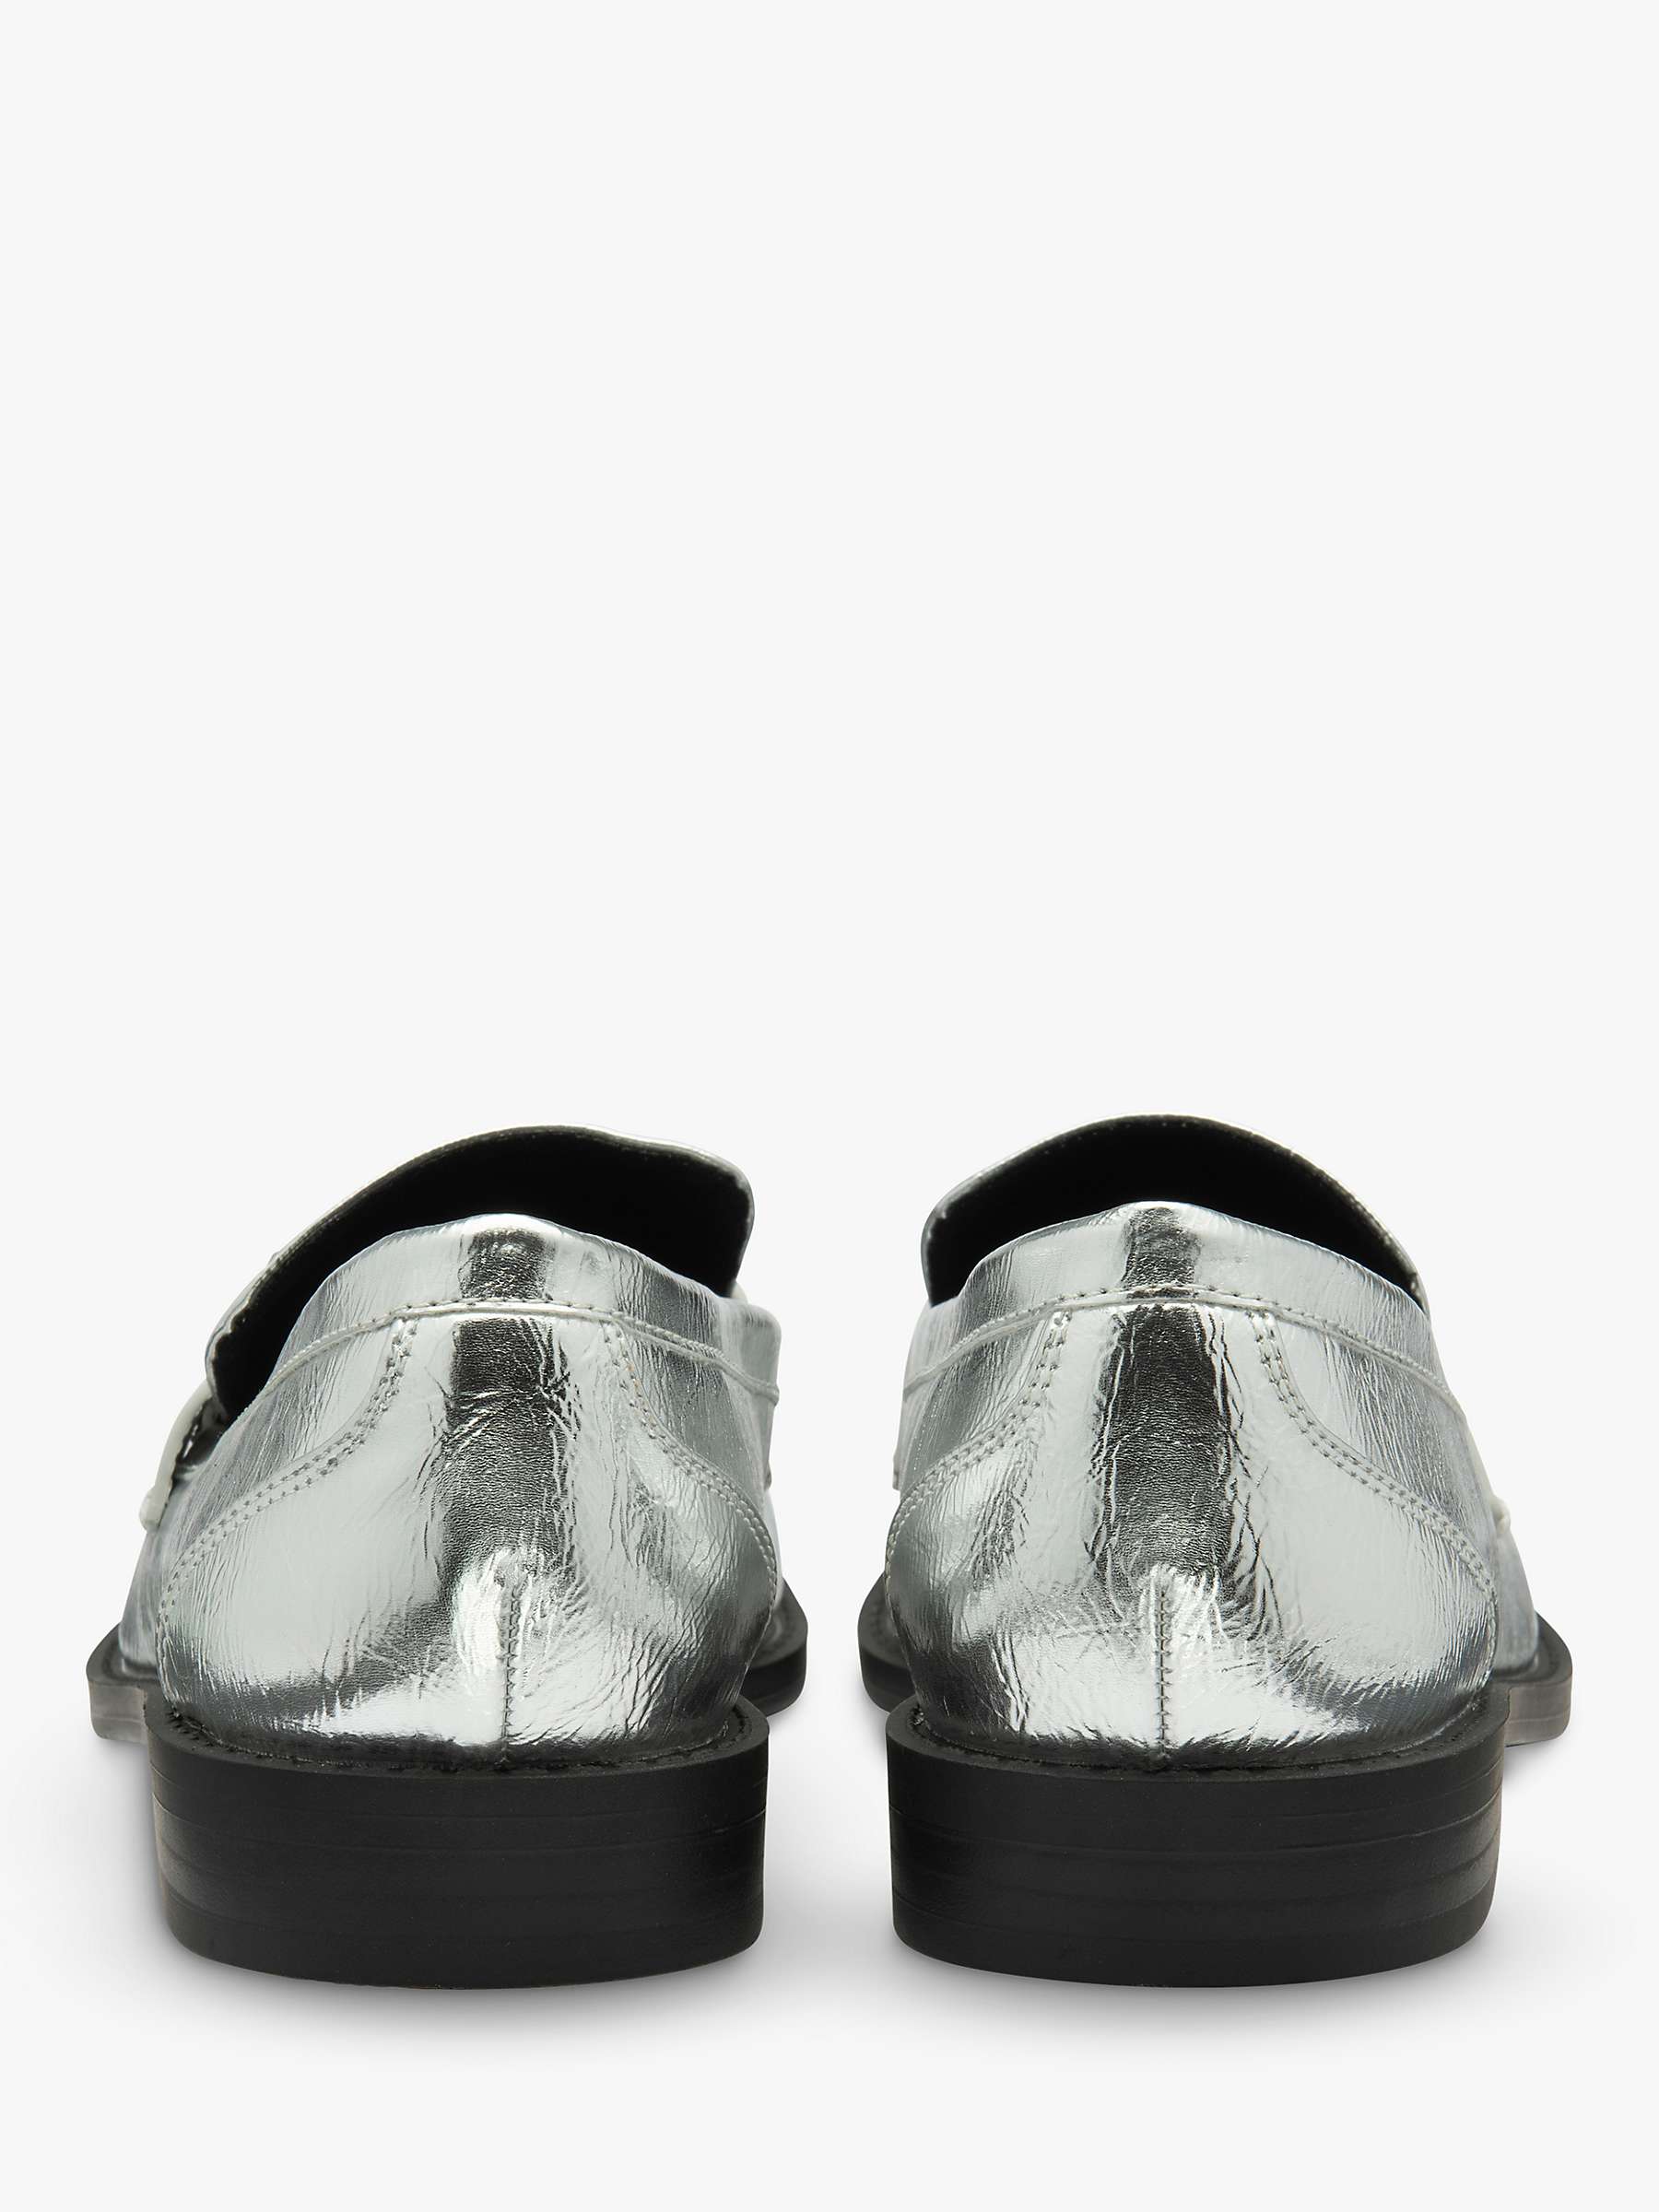 Buy Ravel Tavy Loafers, Silver Online at johnlewis.com